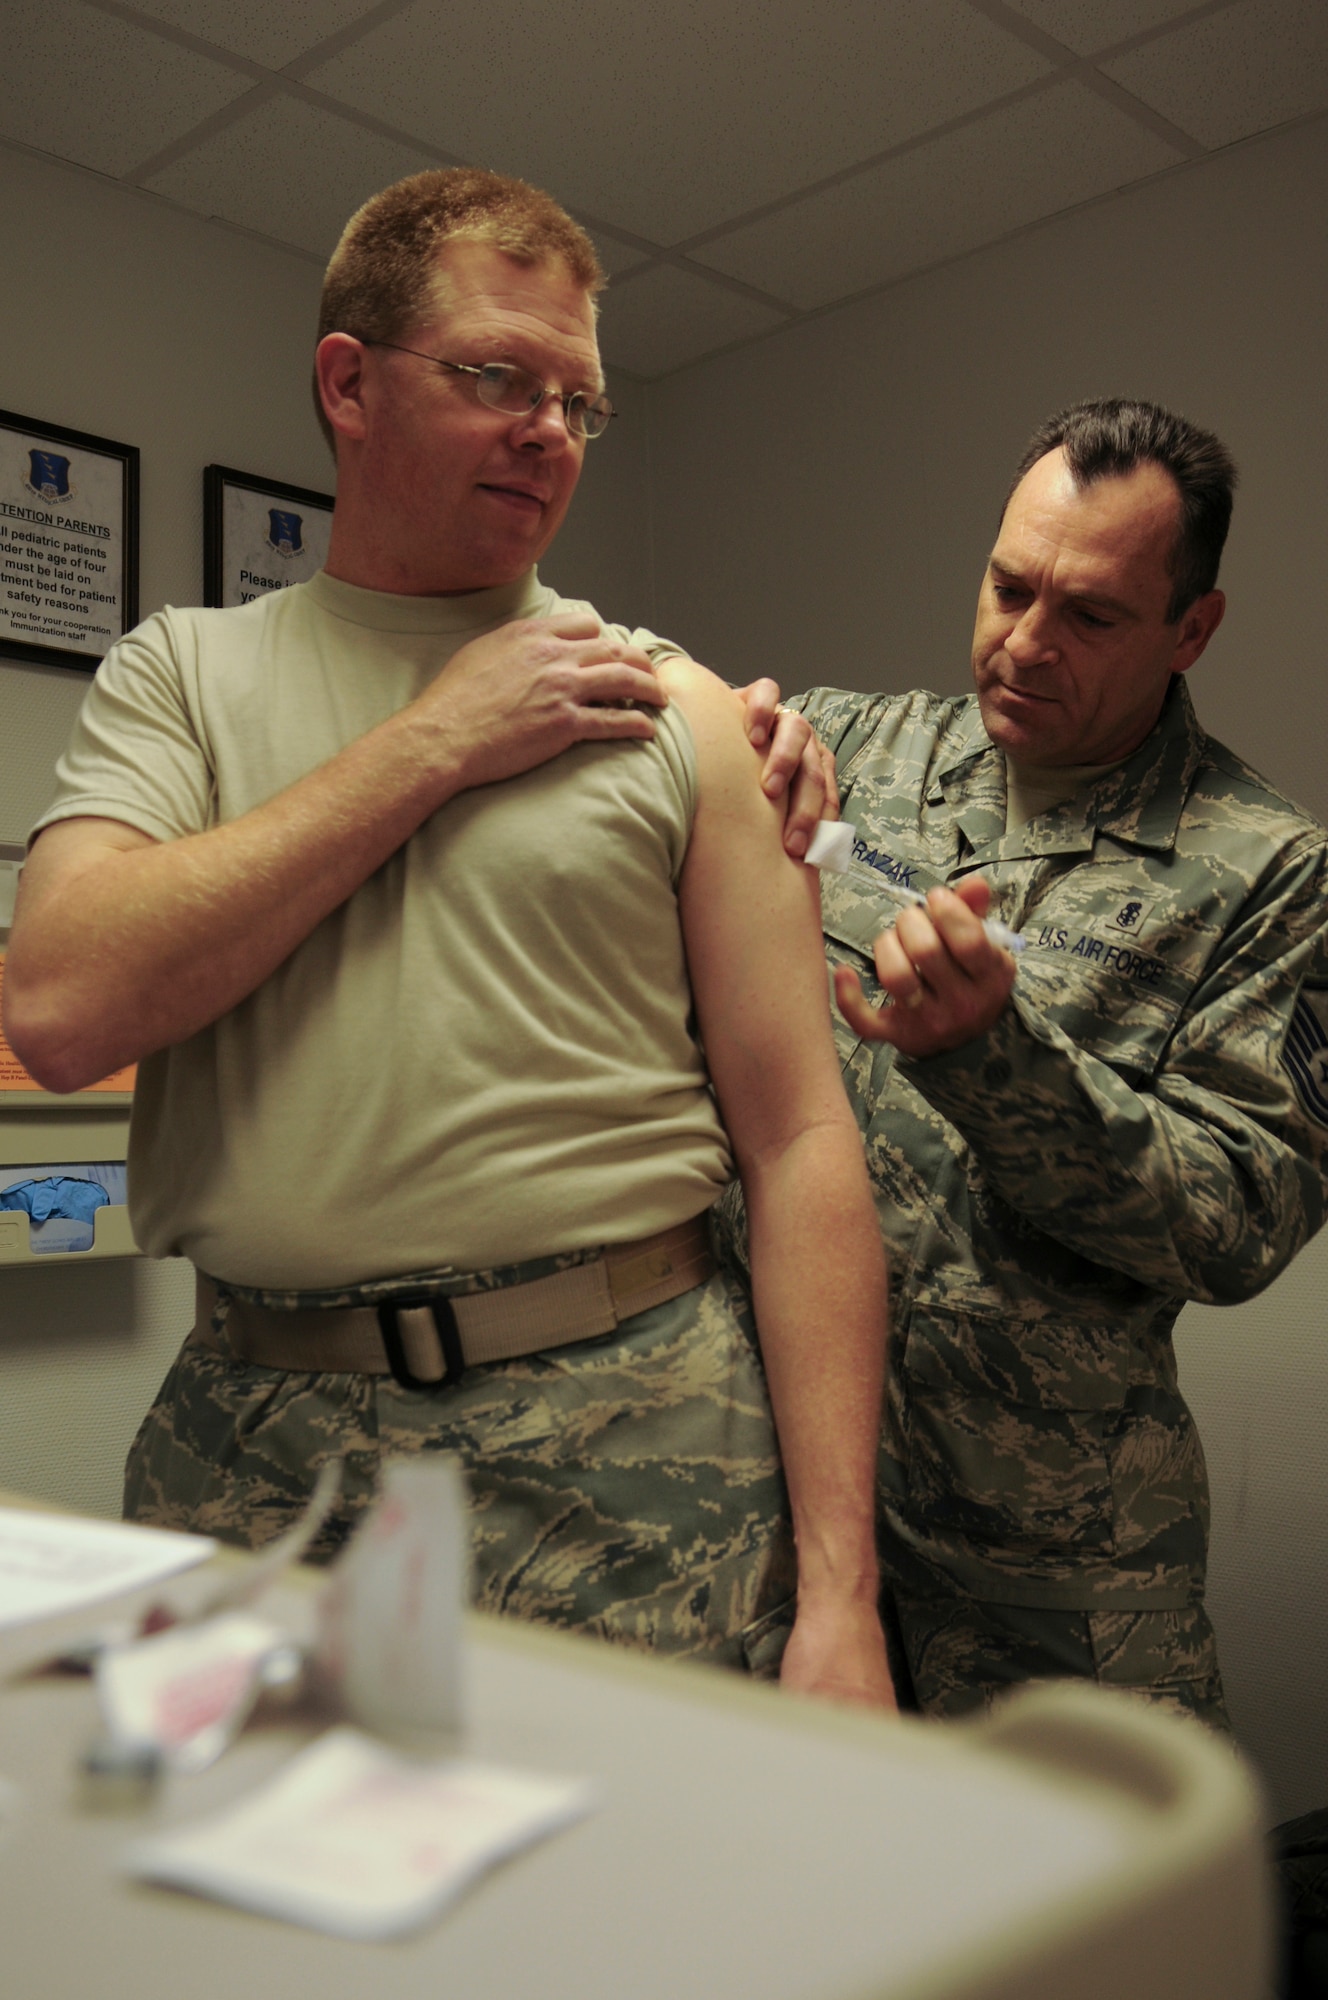 United States Air Force Master Sgt. Vance Grazak, 37th Airlift Squadron, senior independent duty medical technician assigned to the 435th Medical Group, administers a shot to Air National Guardsman Capt. Shane Pair, May 14, 2009, Ramstein Air Base, Germany. Captain Pair is a chaplain from the 188th Fighter Wing Arkansas Air National Guard, who is deployed to the 435th Contingency Aeromedical Staging Facility. (U.S. Air Force photo by Airman 1st Class Alexandria Mosness)